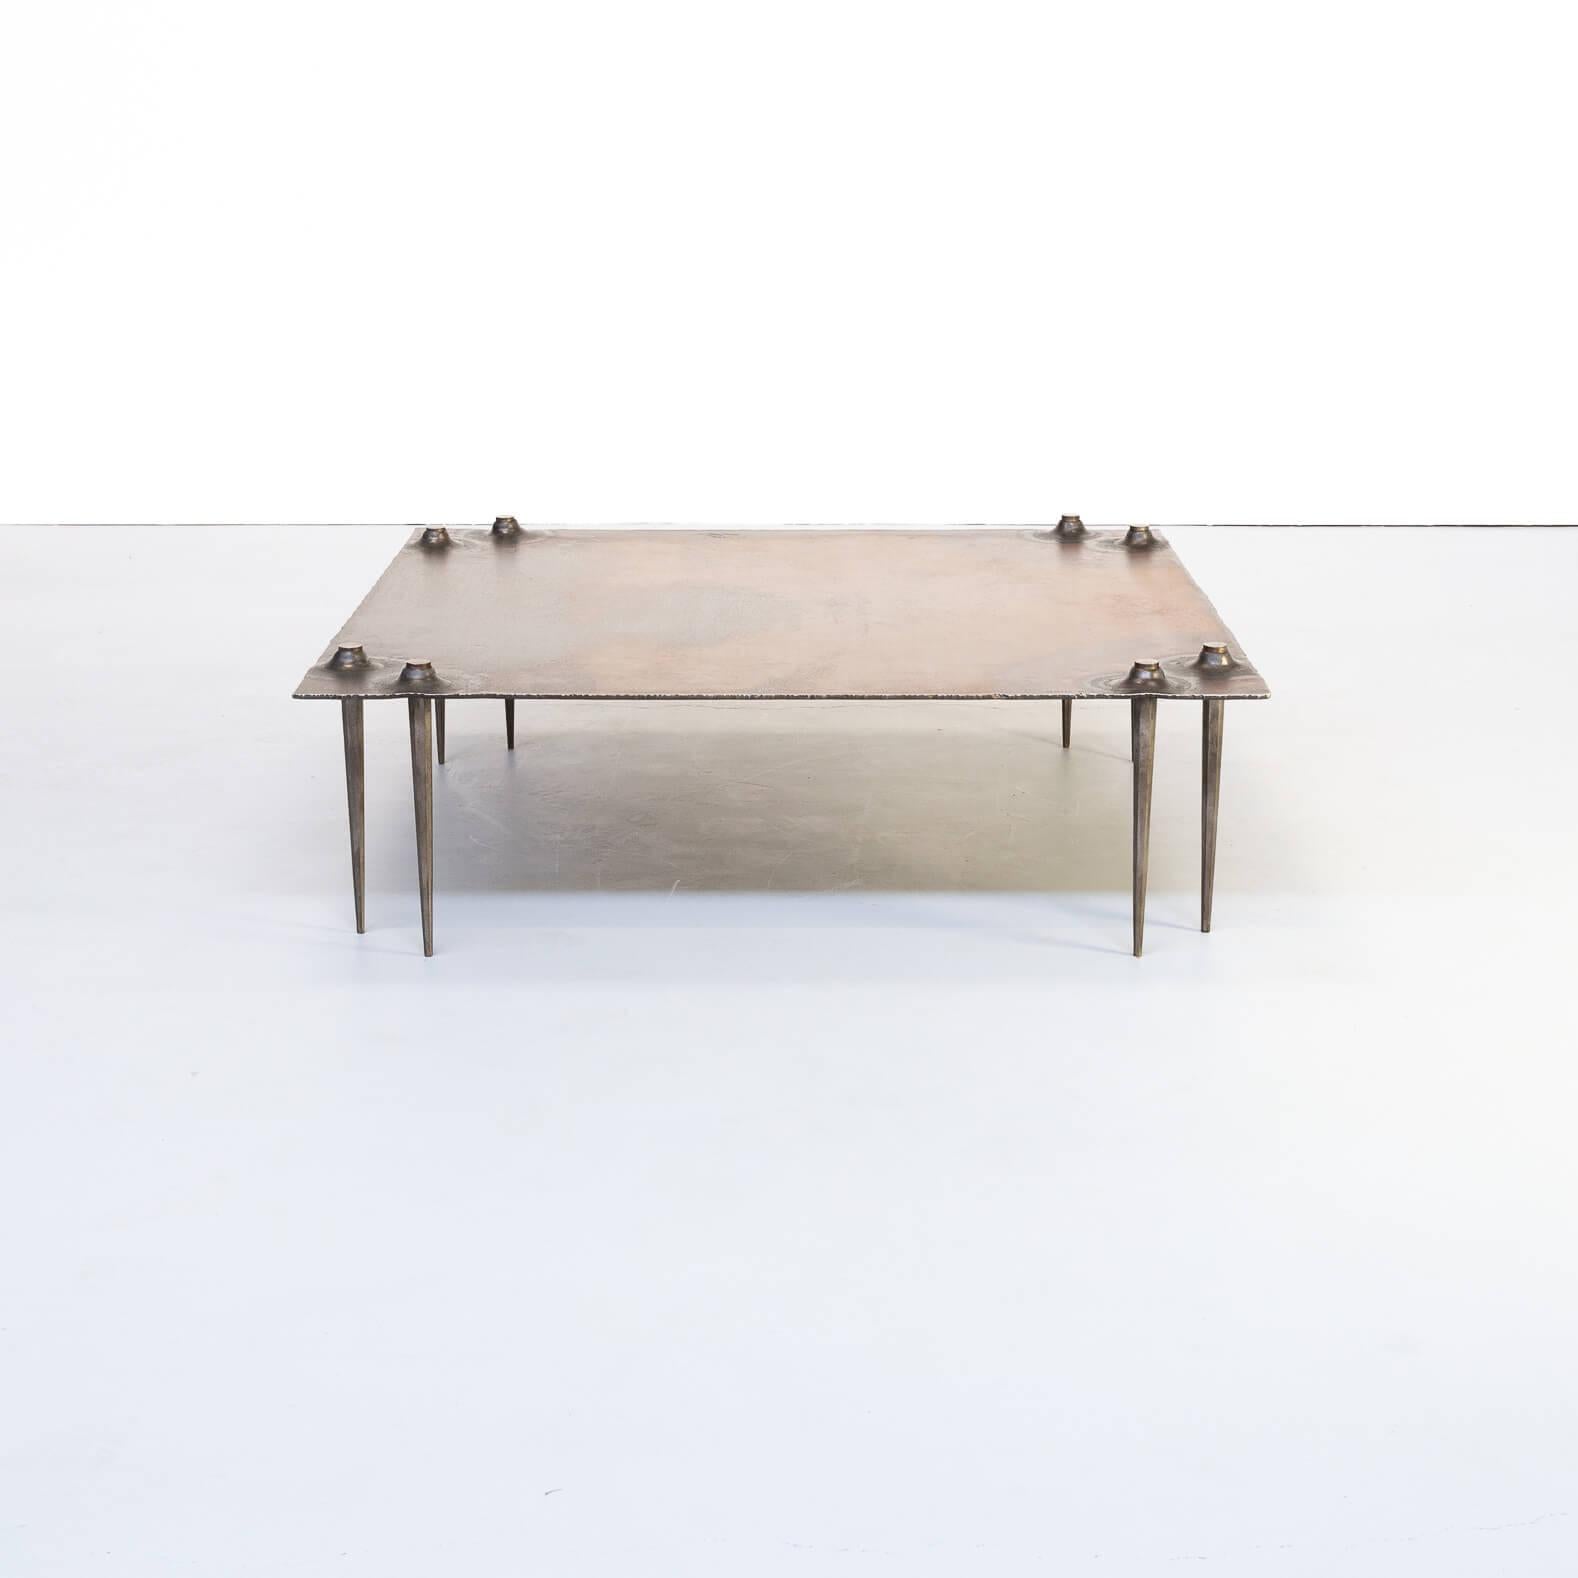 1990s Brutalist coffee table by Idir Mecibah (1958-2013), produced by Smederij Moerman 1998. This solid steel table is from the scrab series. Mecibah designed the scrab series in the late 1980s and the table has been produced till the end of the